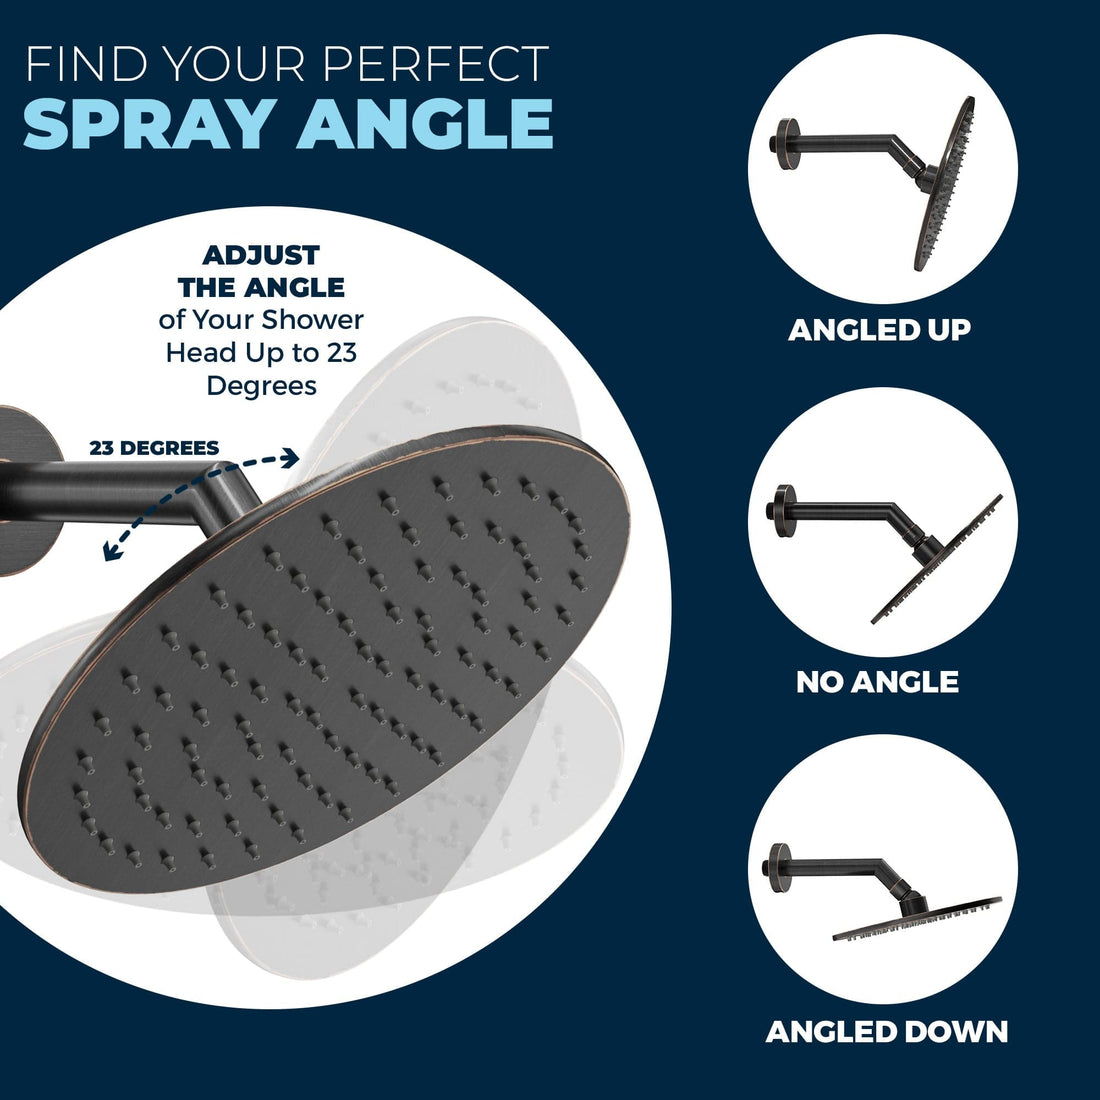 Adjustable Spray Angle - Oil Rubbed Bronze - ALL METAL 8 Inch Rainfall Shower Head - Shower Head Rainfall - 2.5 GPM High Flow Shower Head Optimized for Pressure – Large Round Rain Shower Heads - Wall, Overhead, or Ceiling Mount - The Shower Head Store